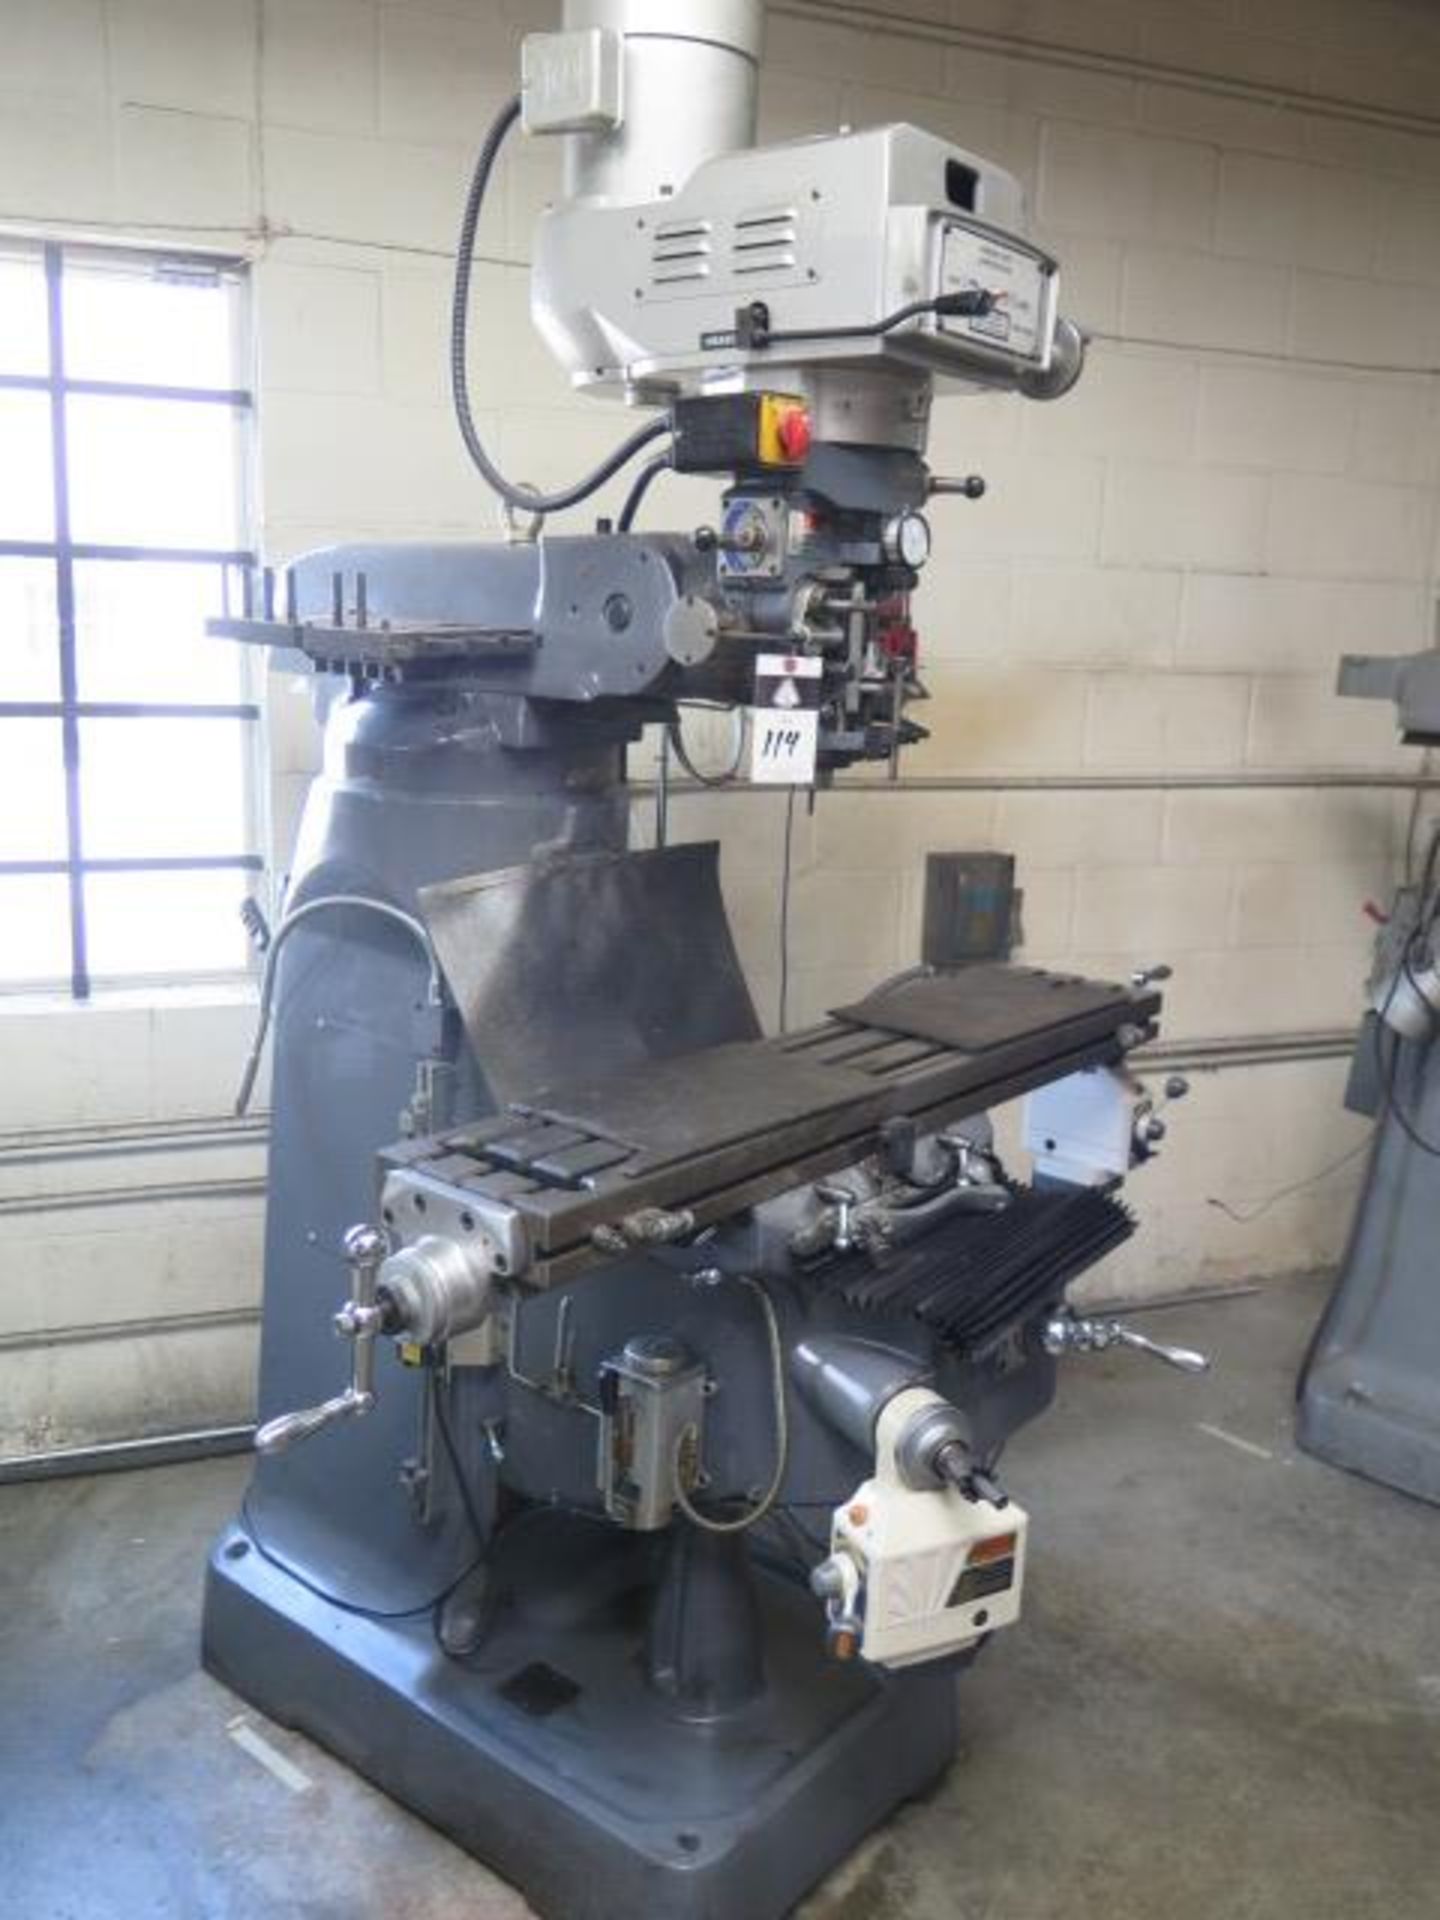 Import Vertical Mill s/n F050909 w/ Contour SDS2MS Prog DRO, 3Hp Motor, 60-4200 Dial, SOLD AS IS - Image 2 of 12